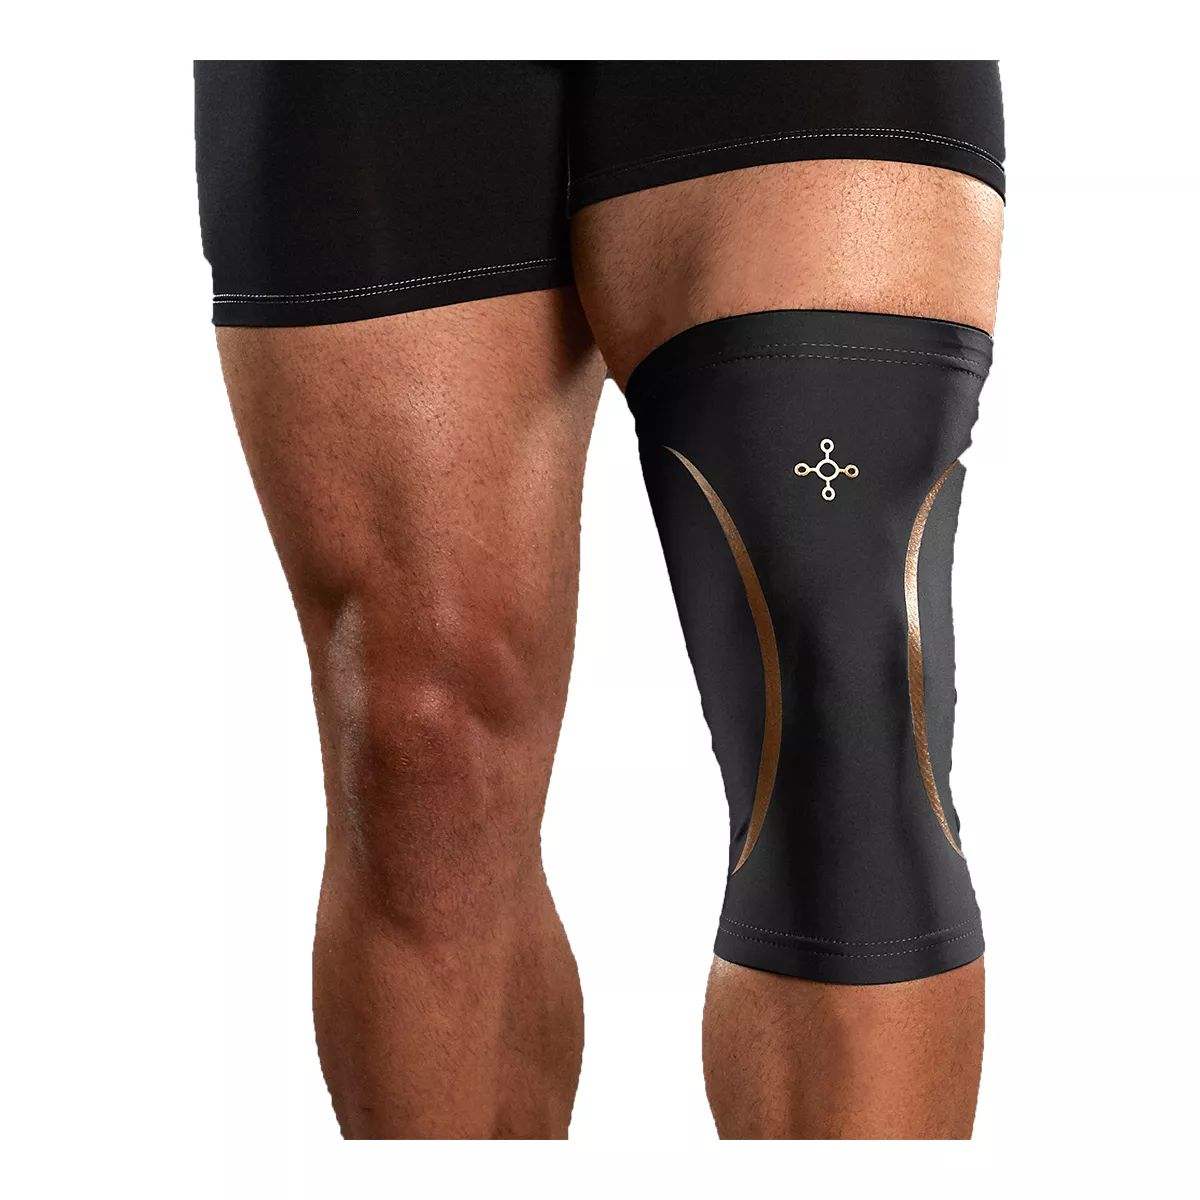 Tommie Copper Compression Knee Sleeve - Black